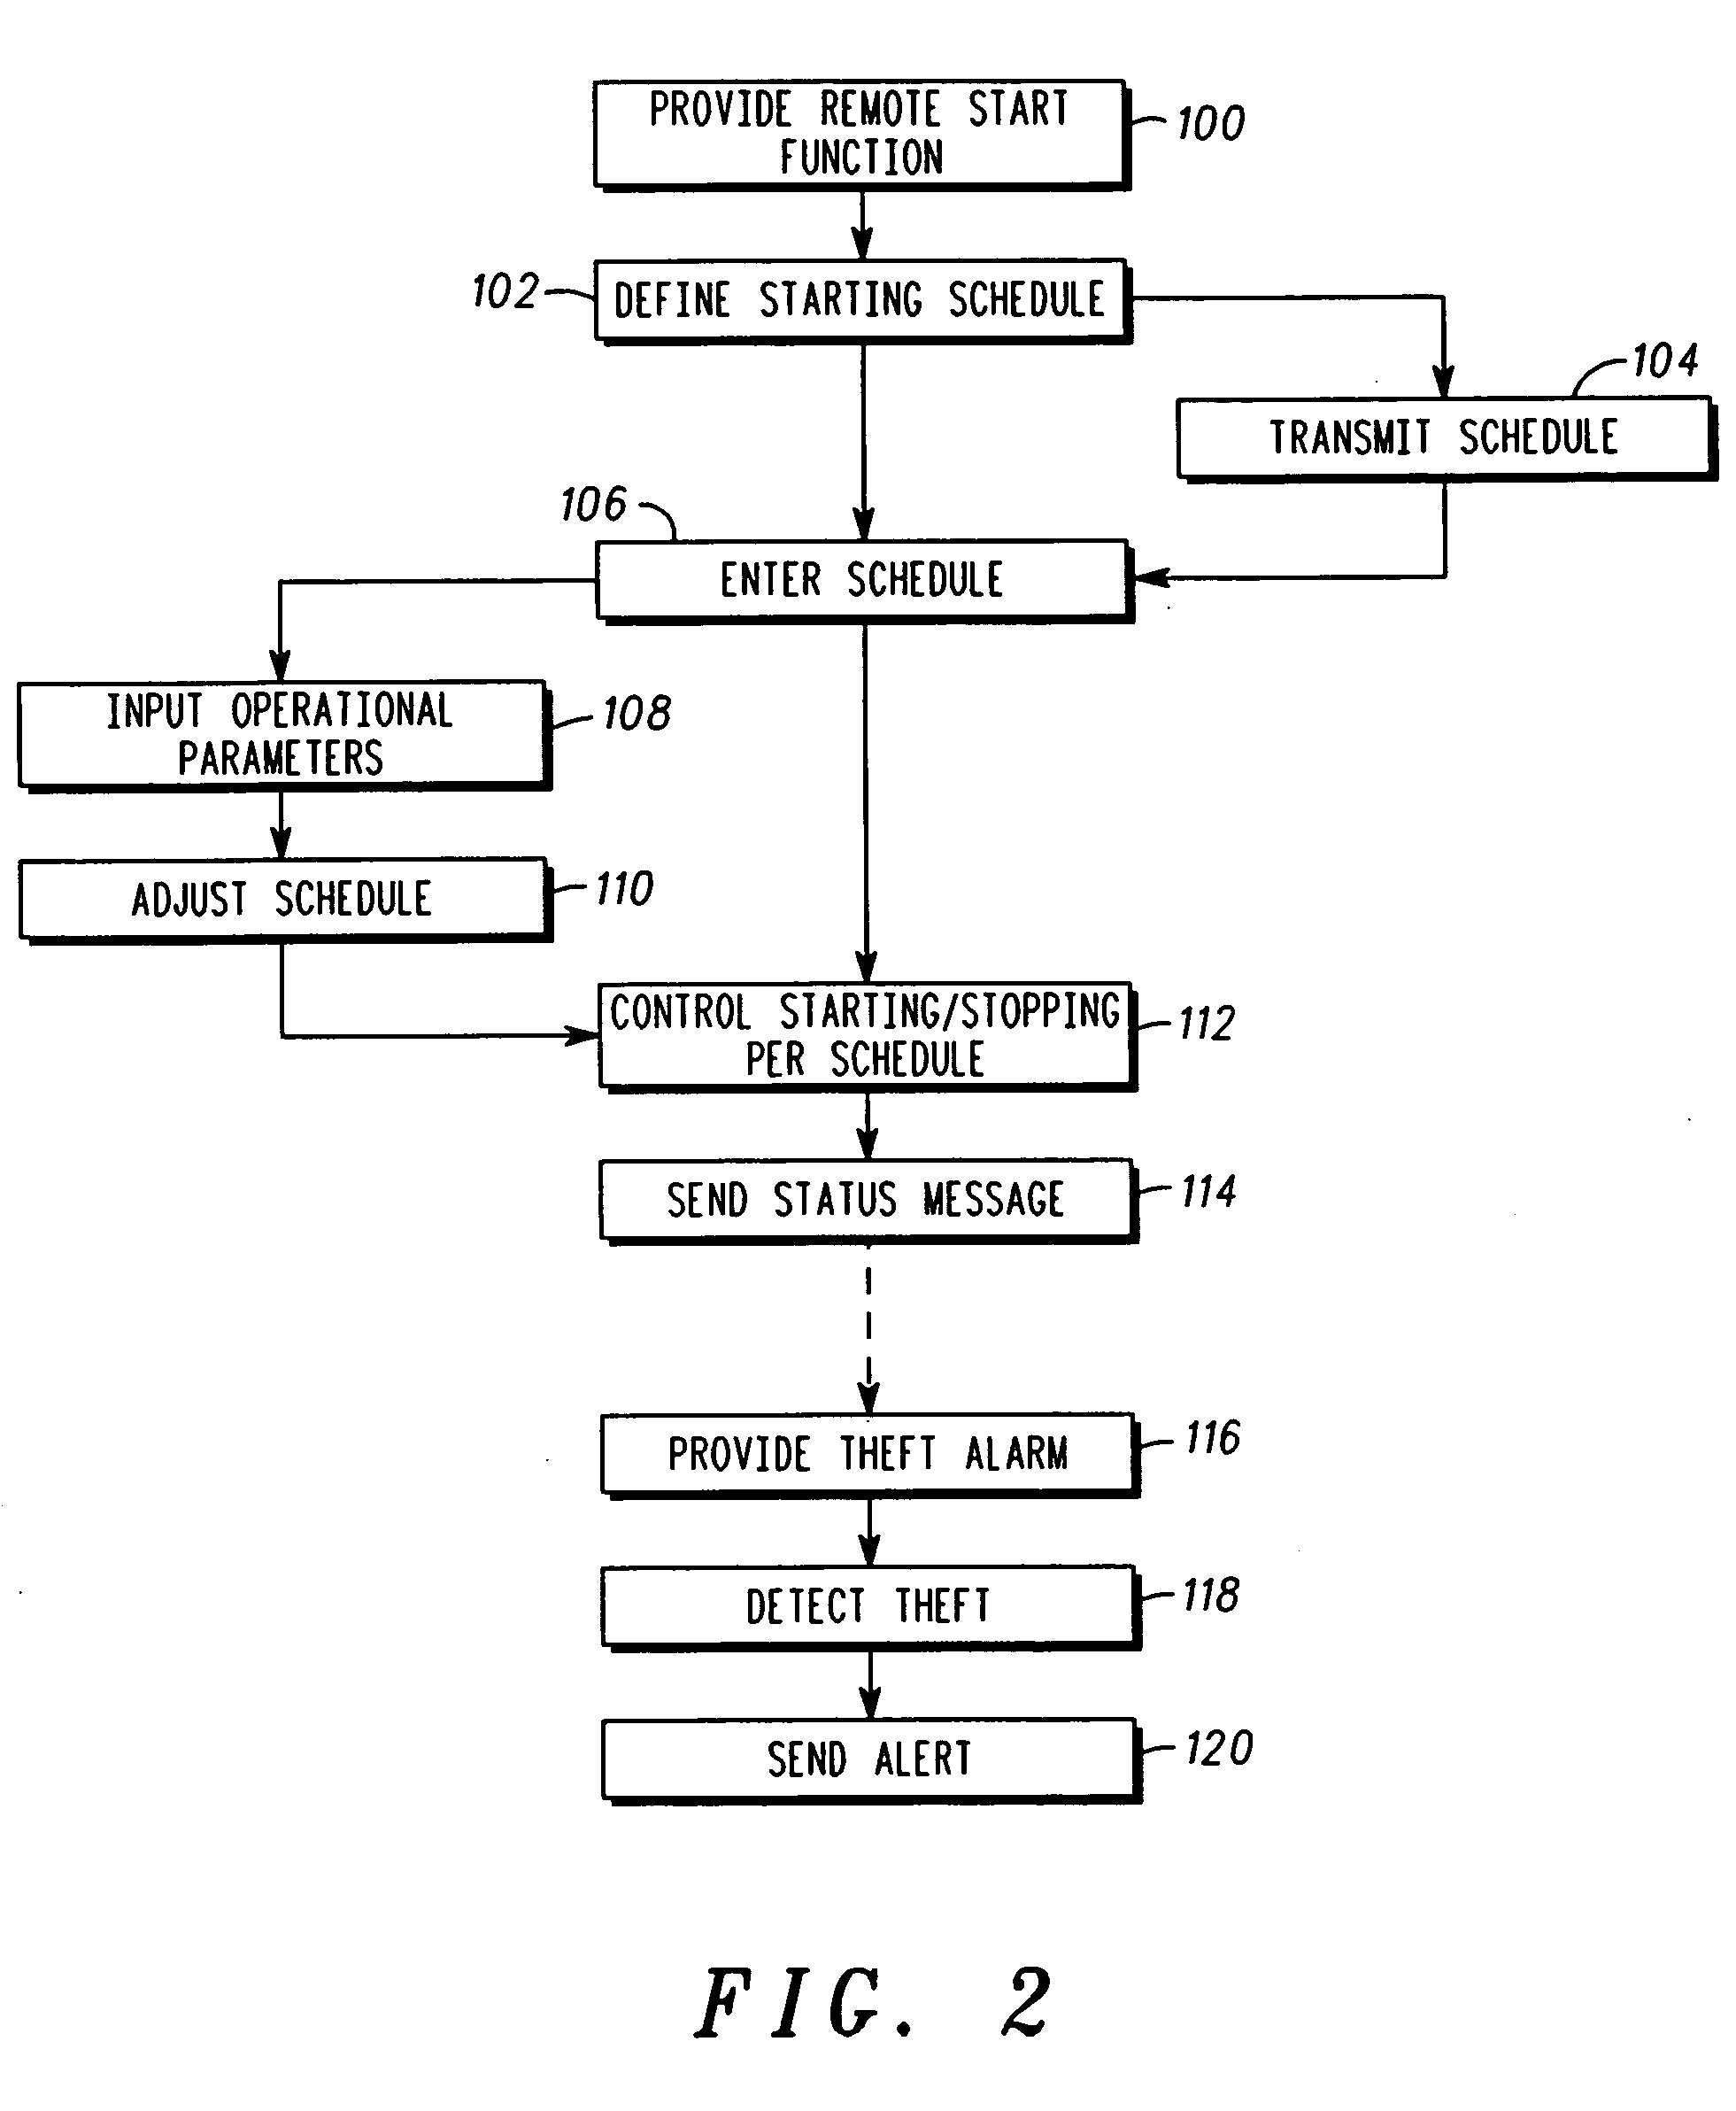 Scheduling remote starting of vehicle